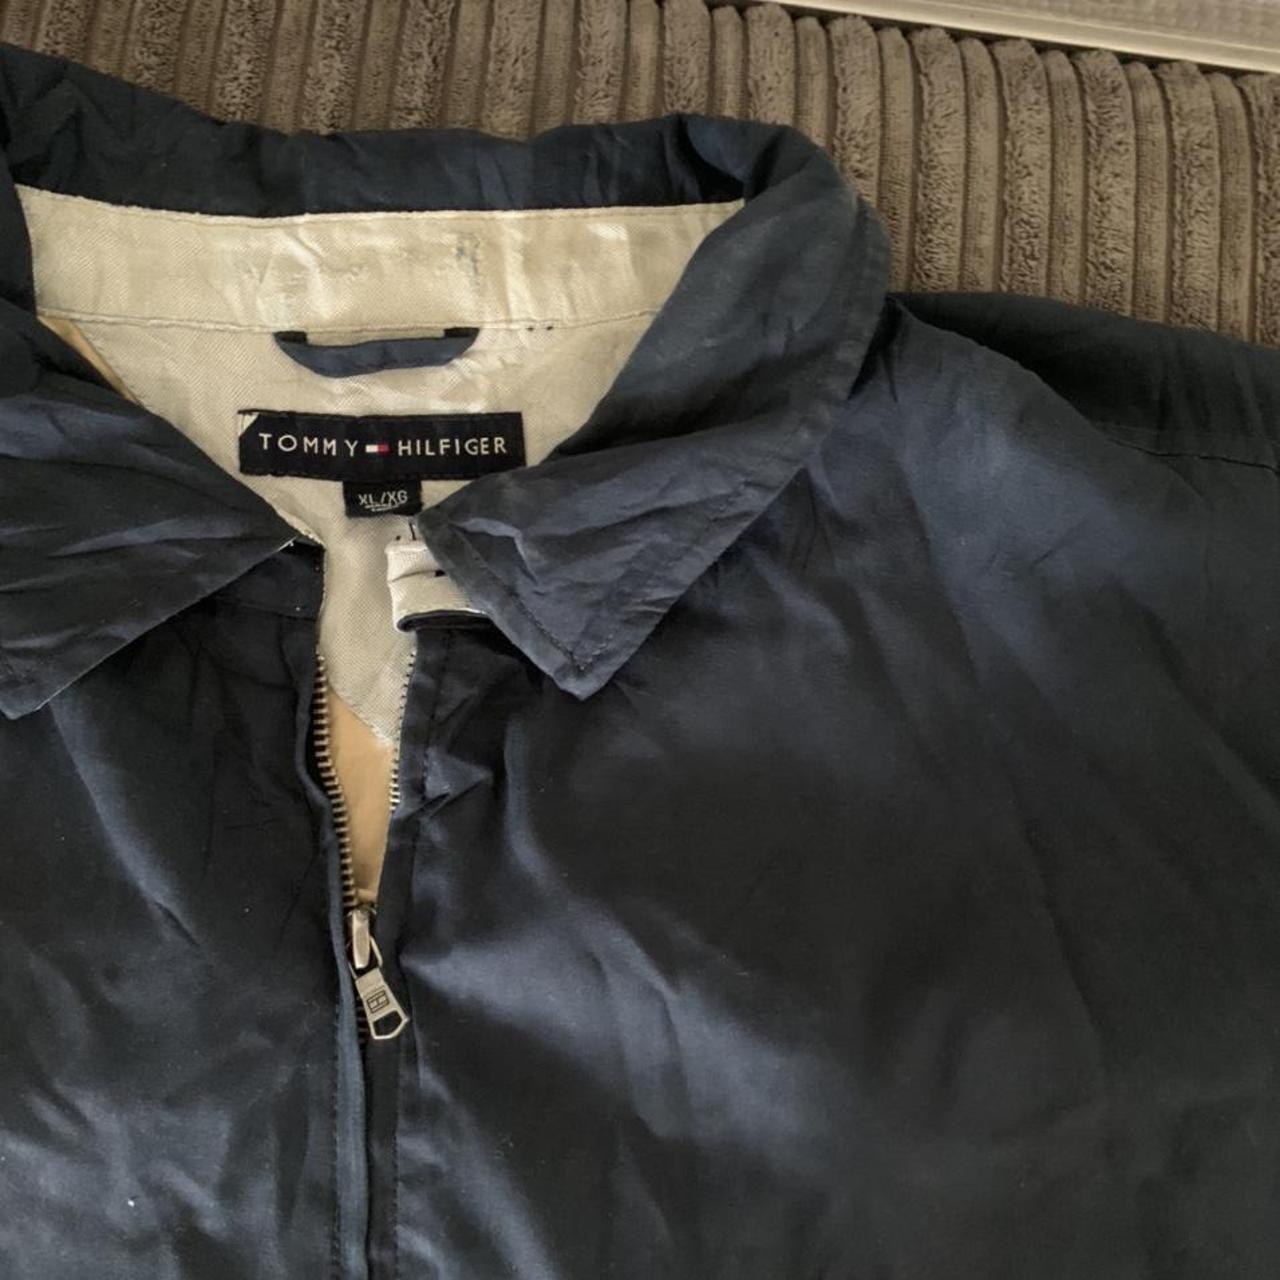 Product Image 2 - navy TOMMY HILFIGER jacket. in